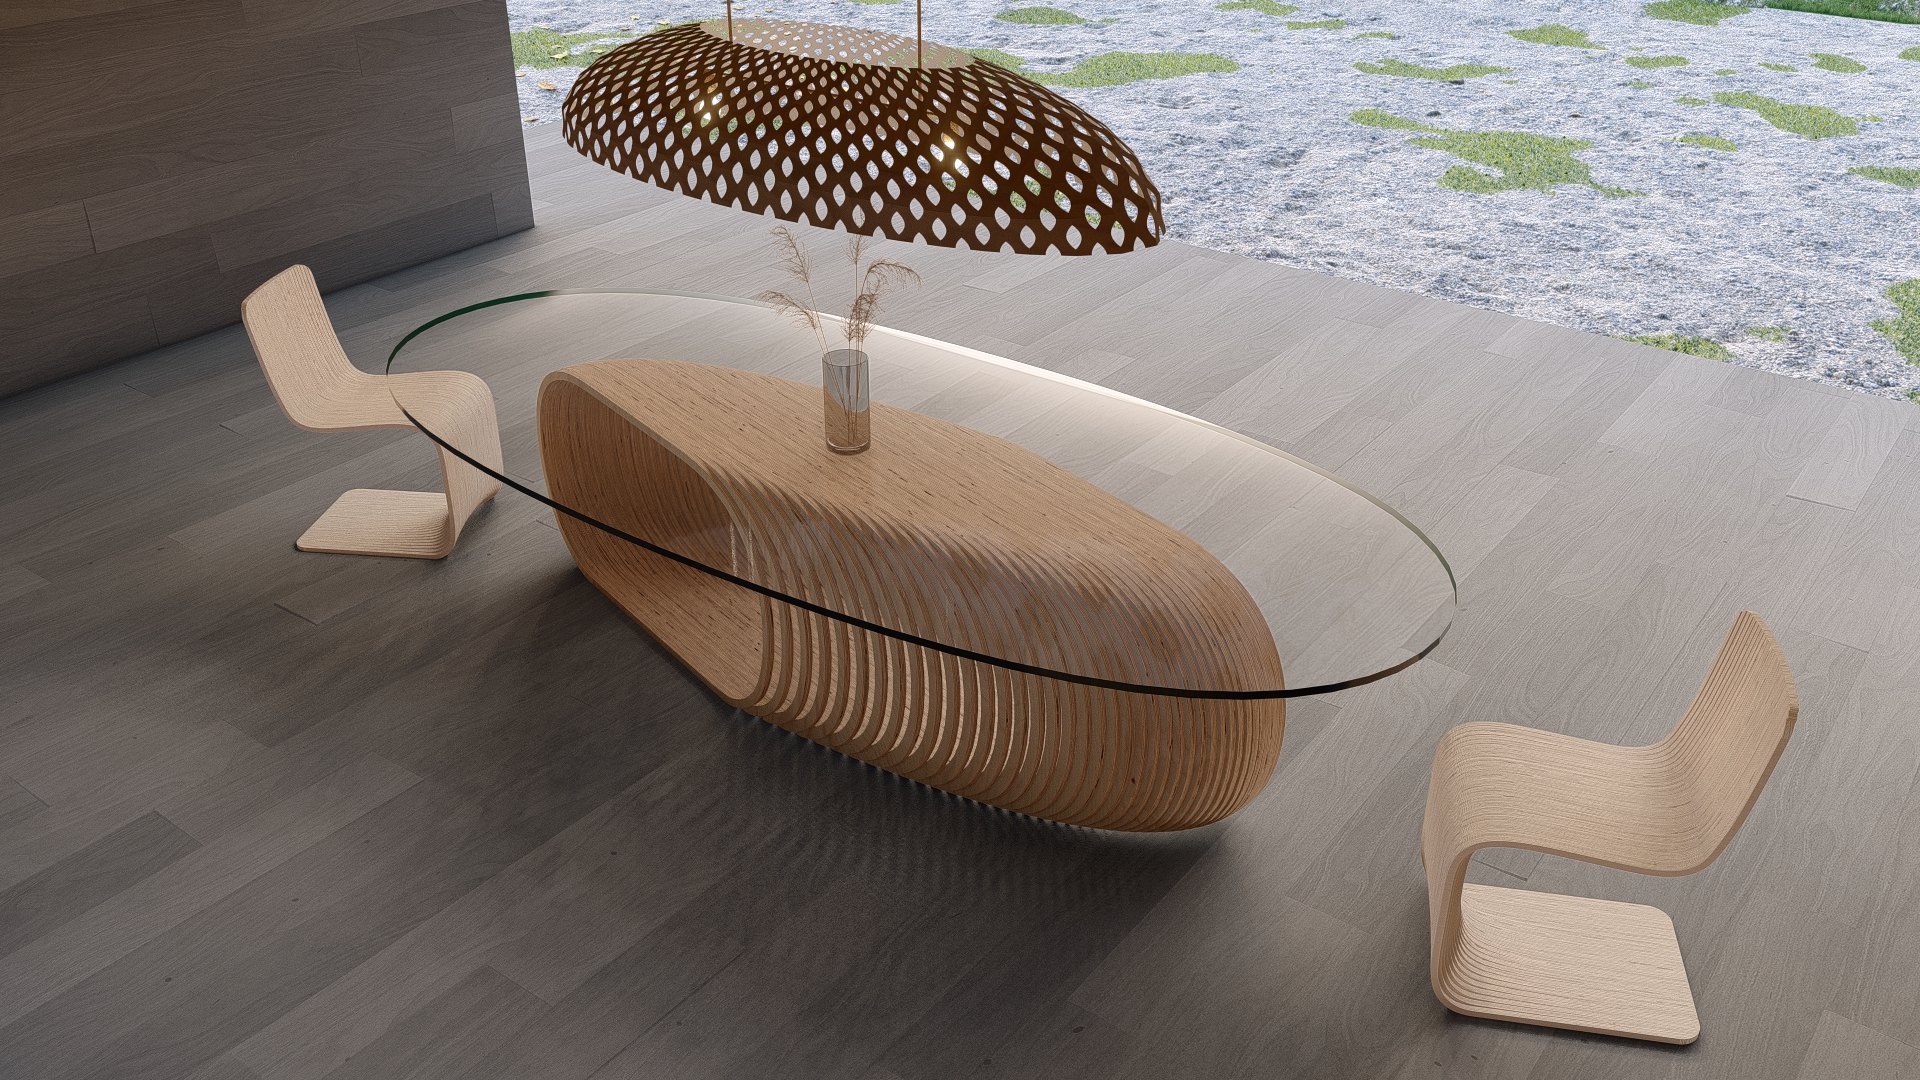 Introducing: Mola Dinning Table. 